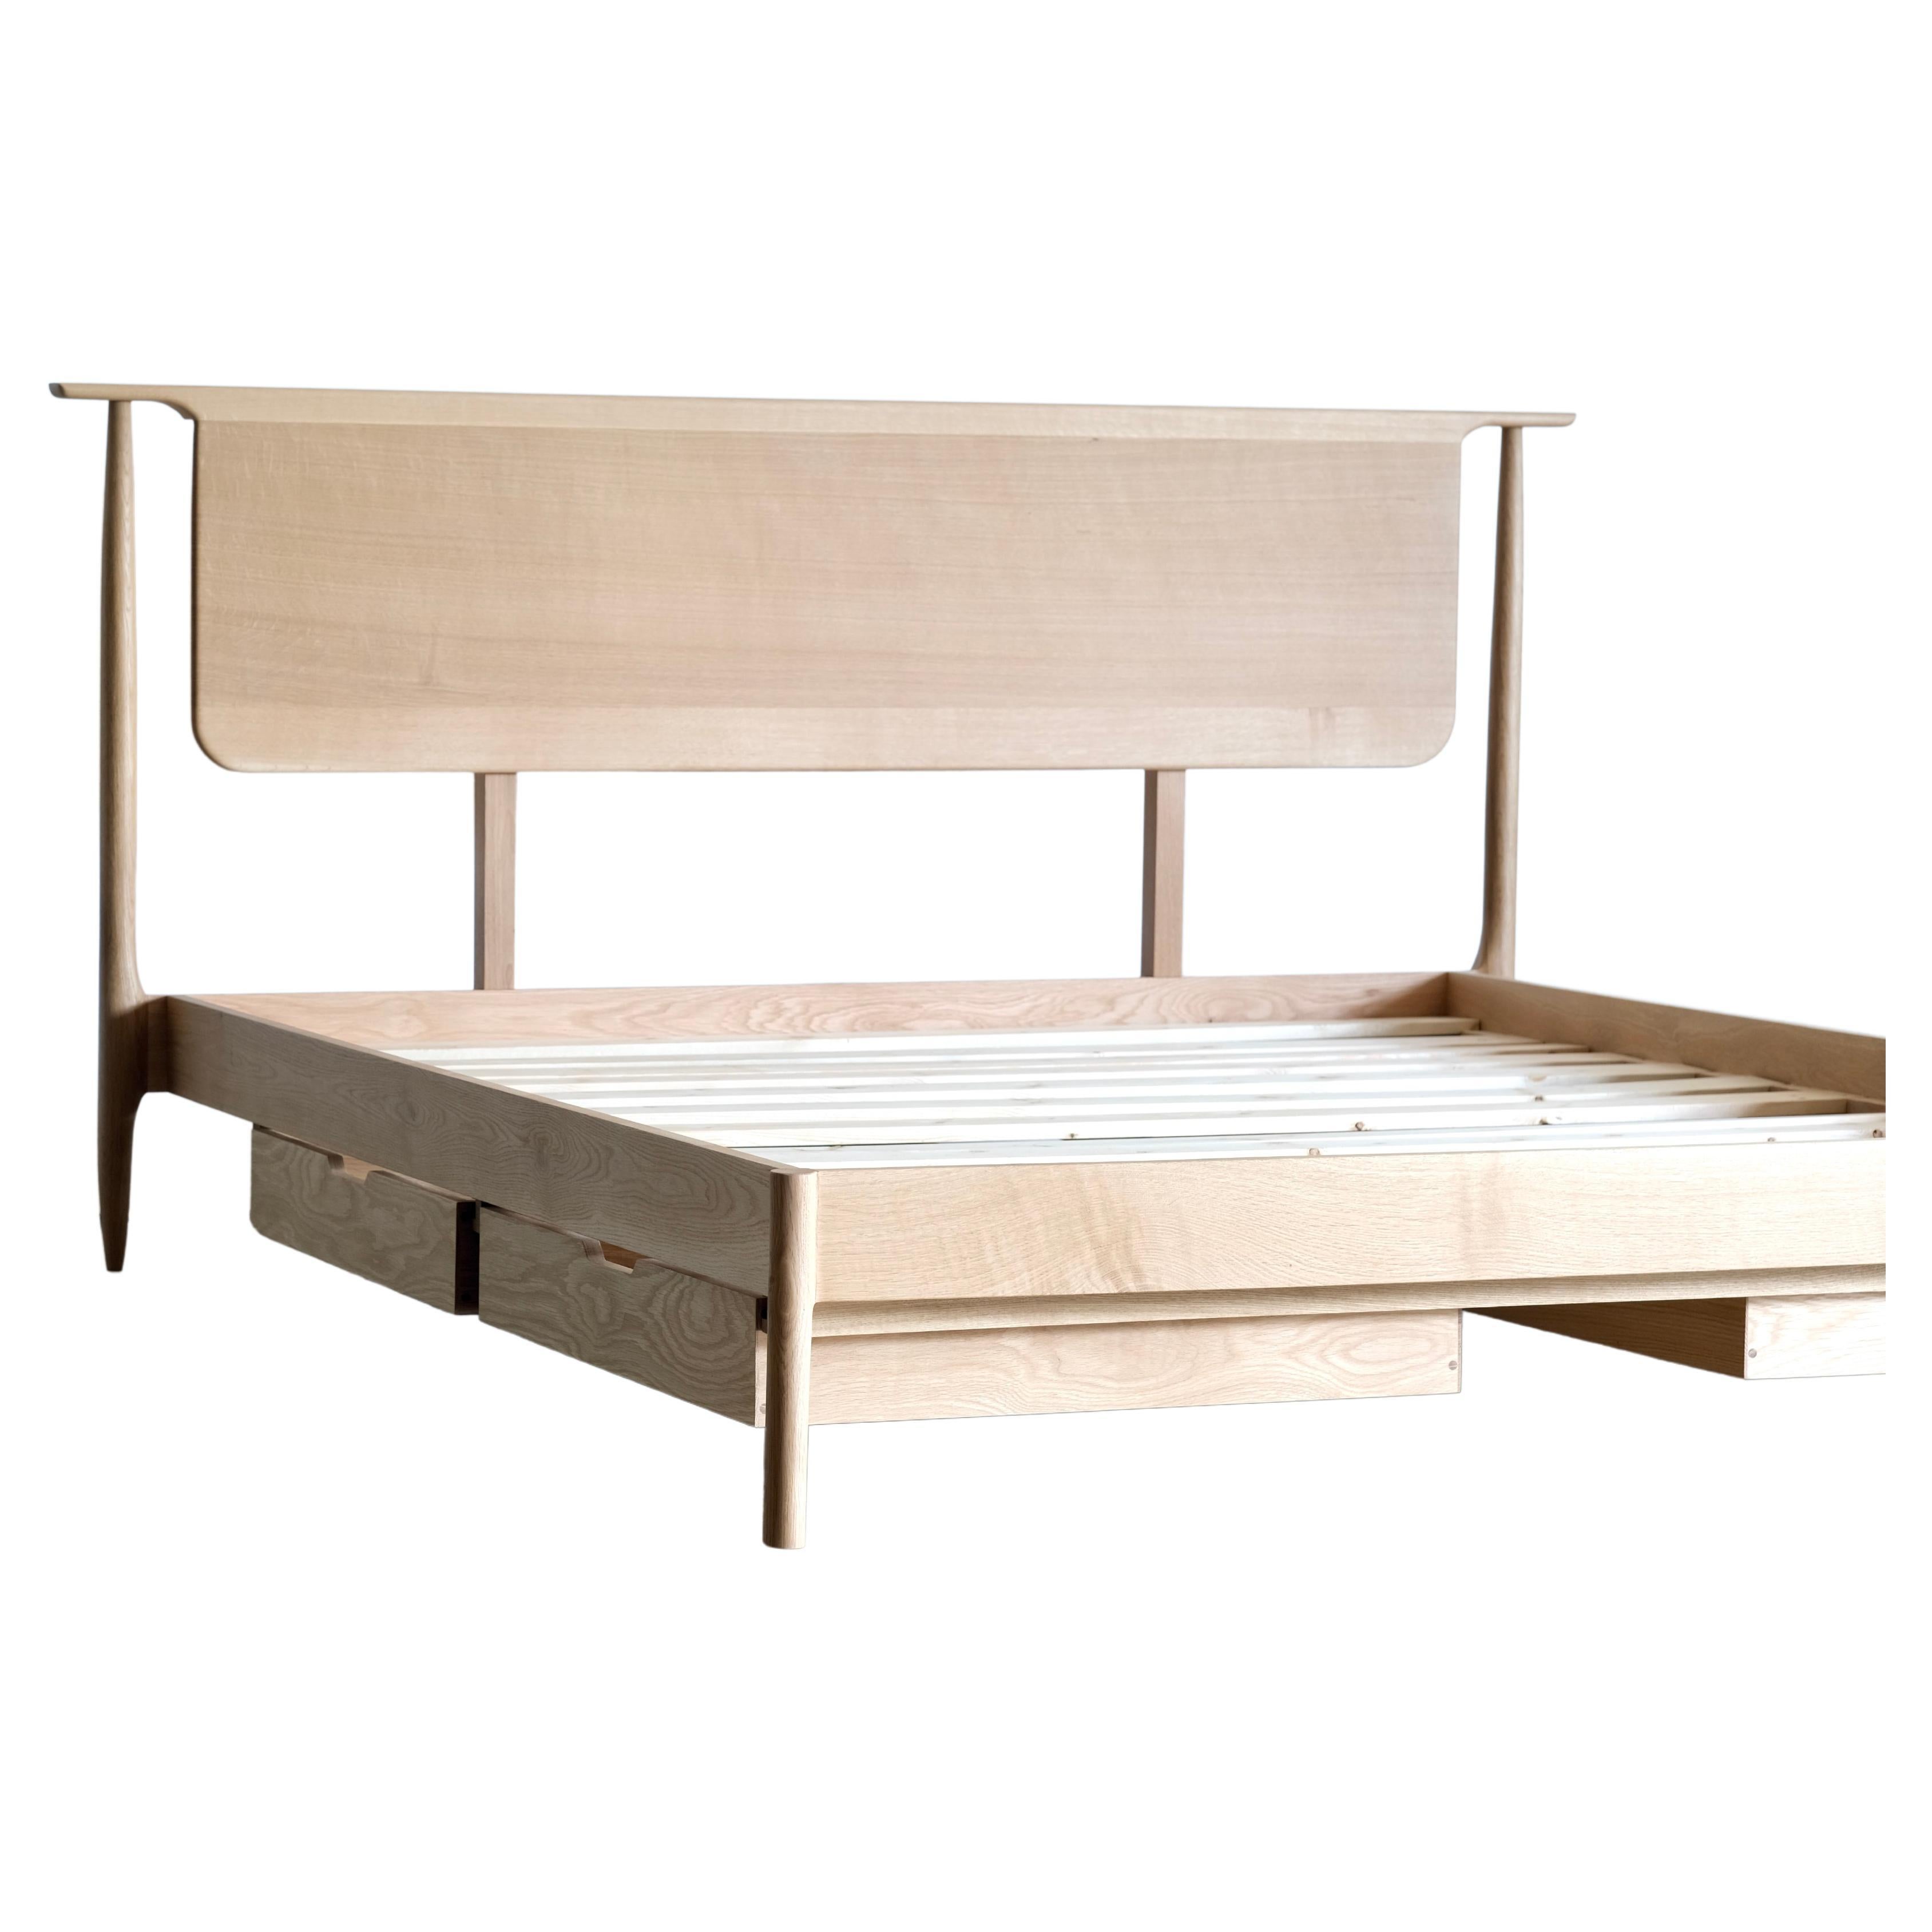 We hope this bed frame is considered both novel and interesting as well as timeless. Built from all solid wood here in our studio in Vancouver Washington. A bed with soul. Clean and interesting lines that flow in and out in every direction.

Our